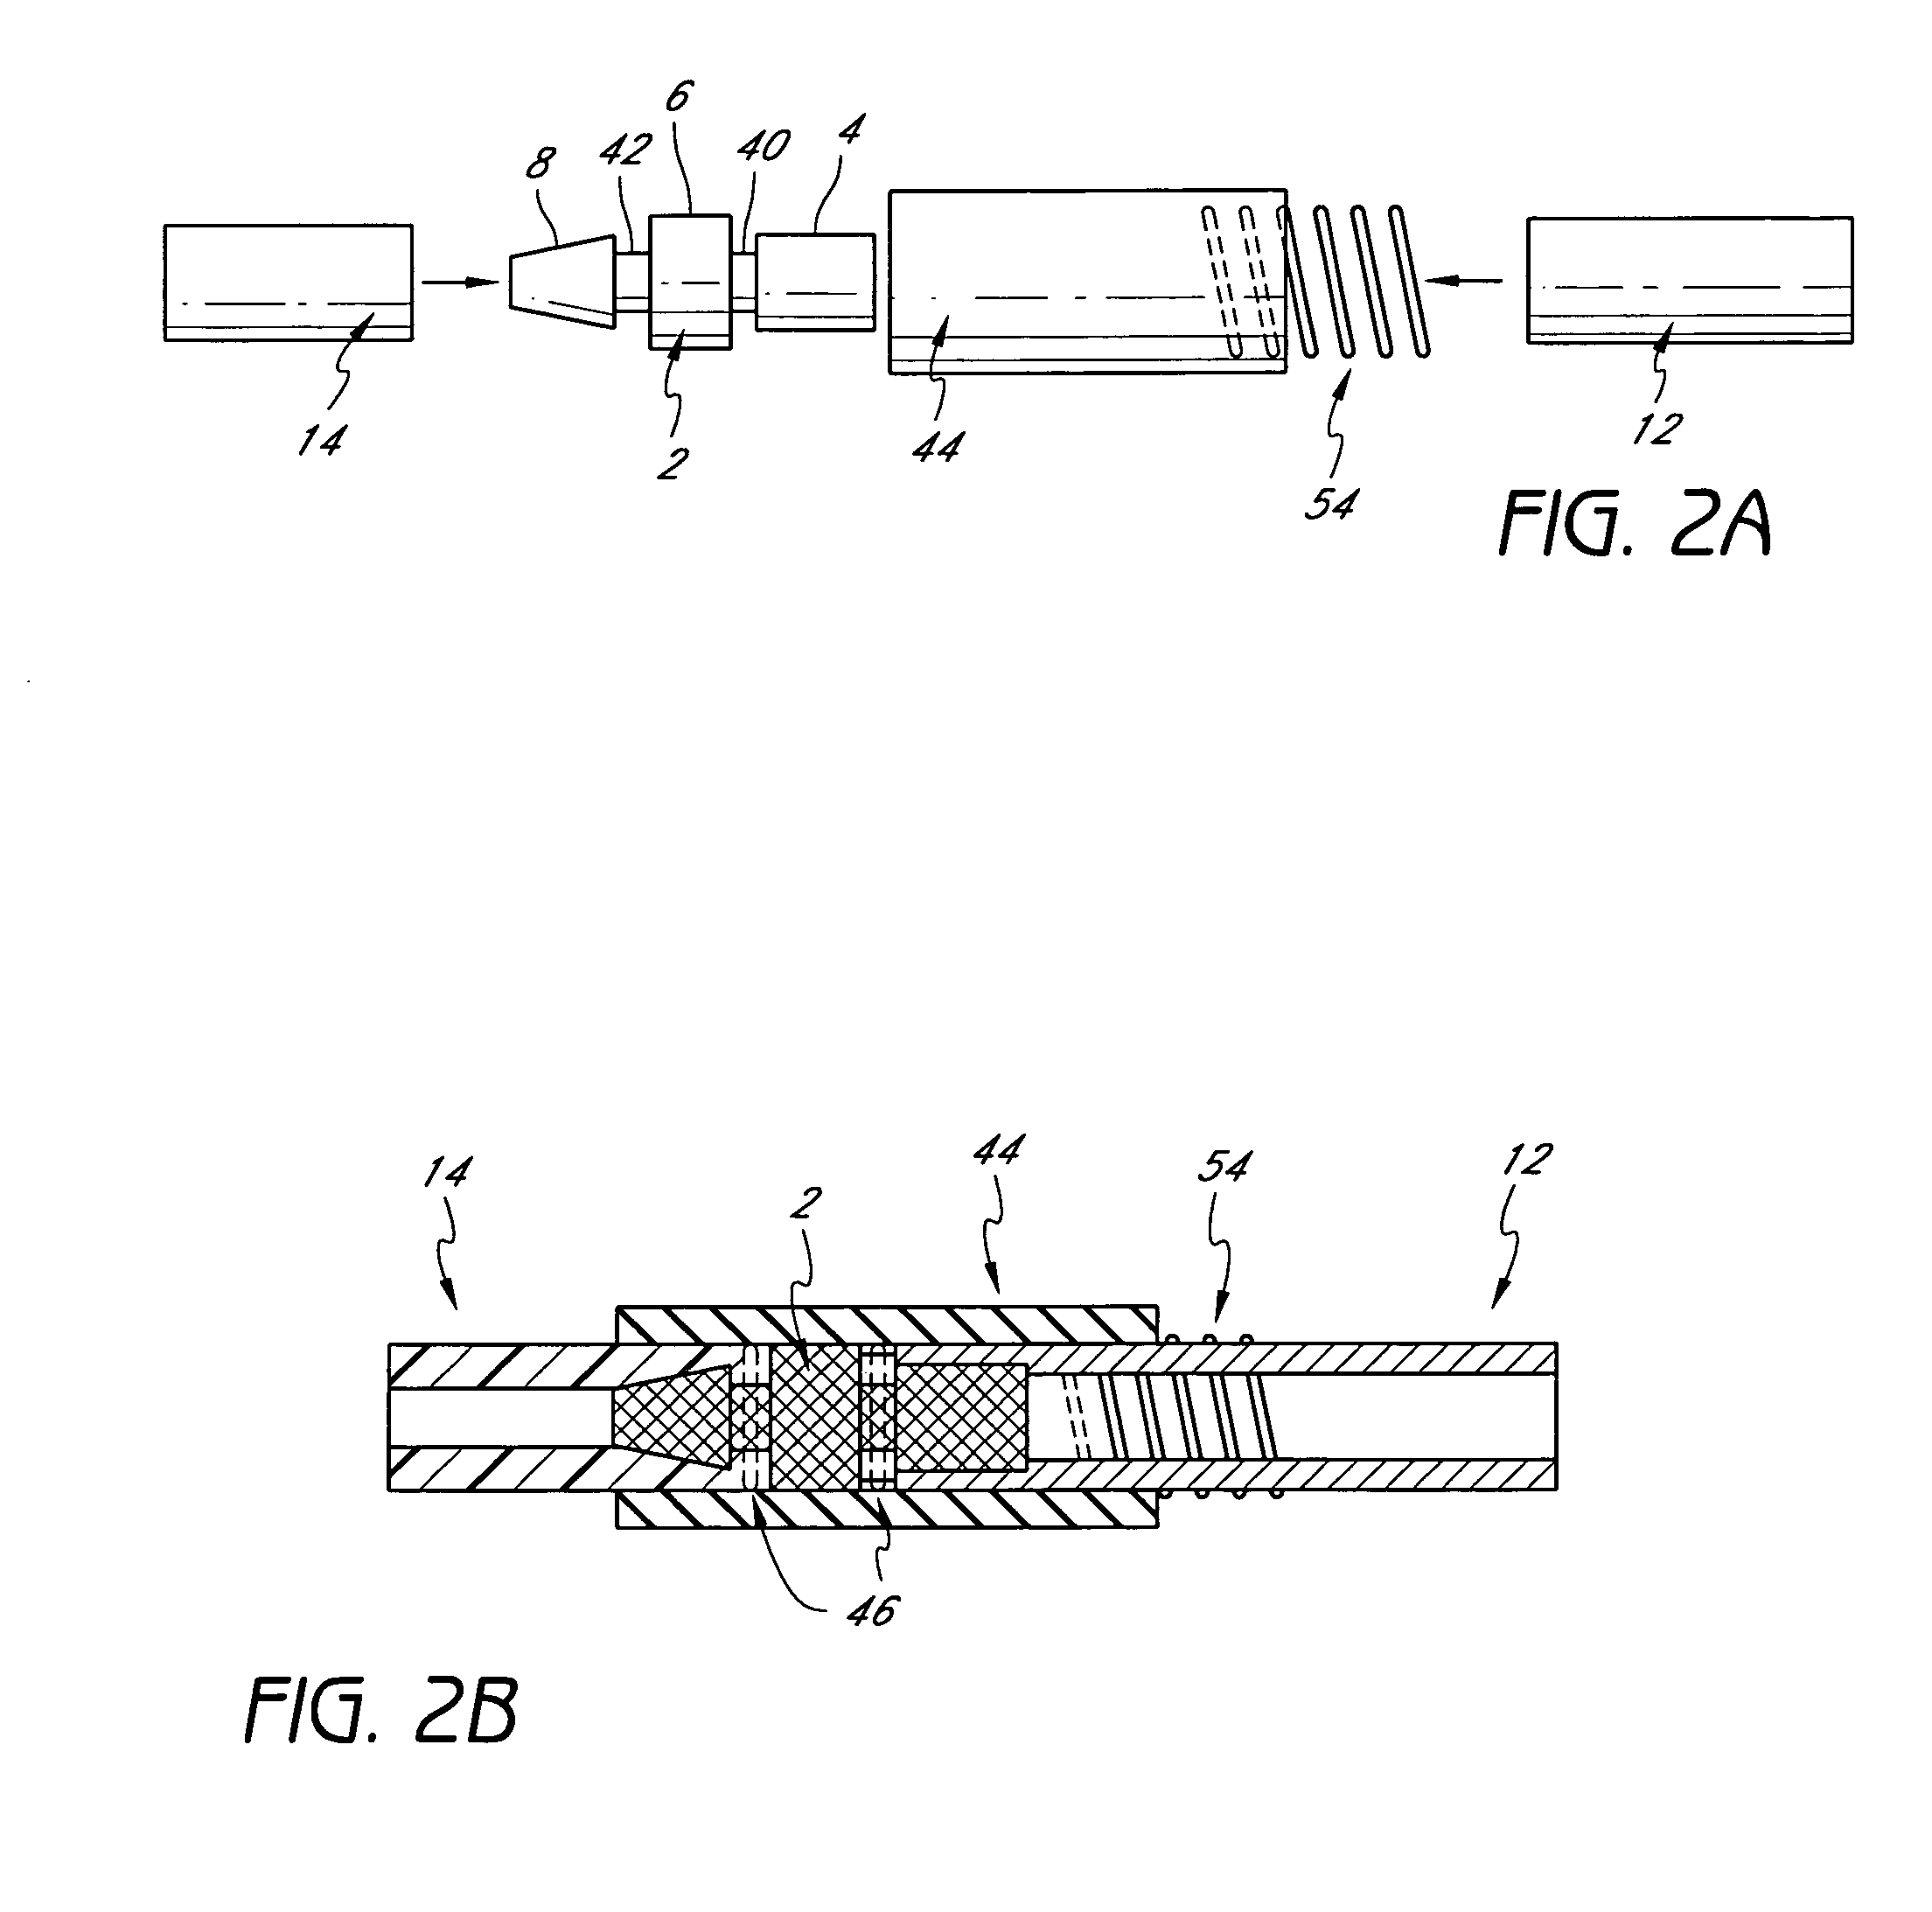 Device and method for vascular access